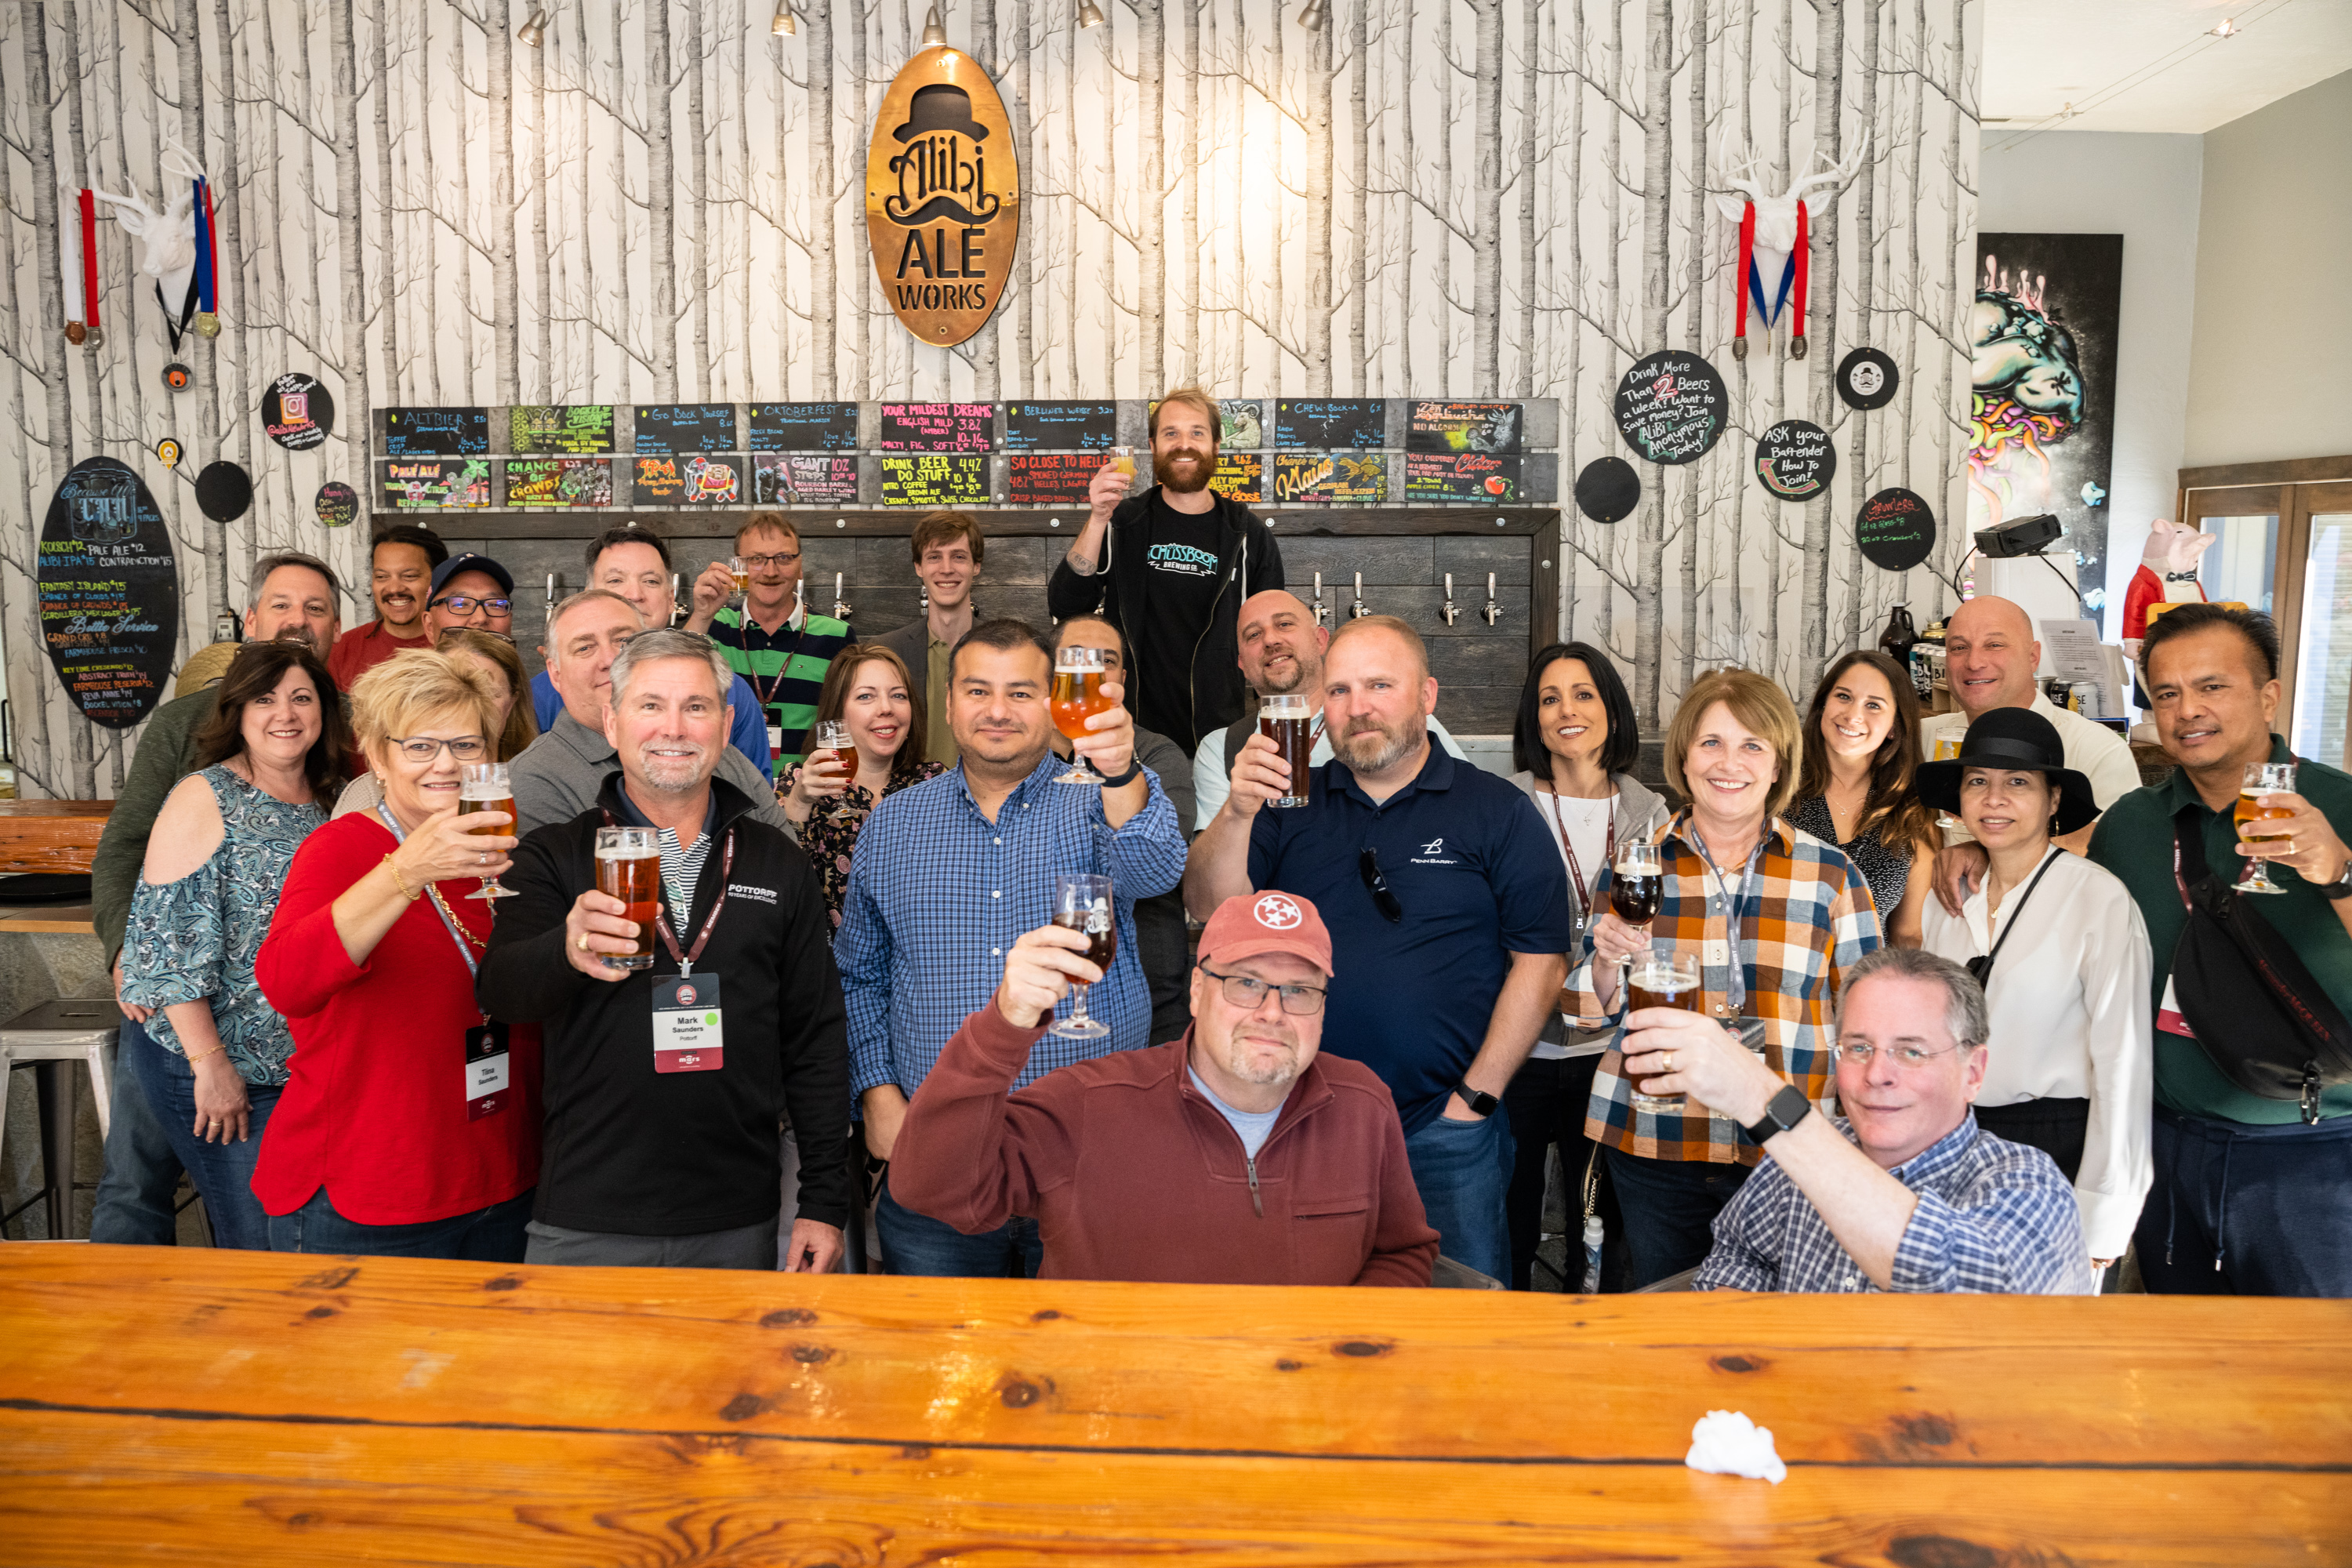 2022 AMCA Annual Meeting attendees tour Alibi Ale Works.